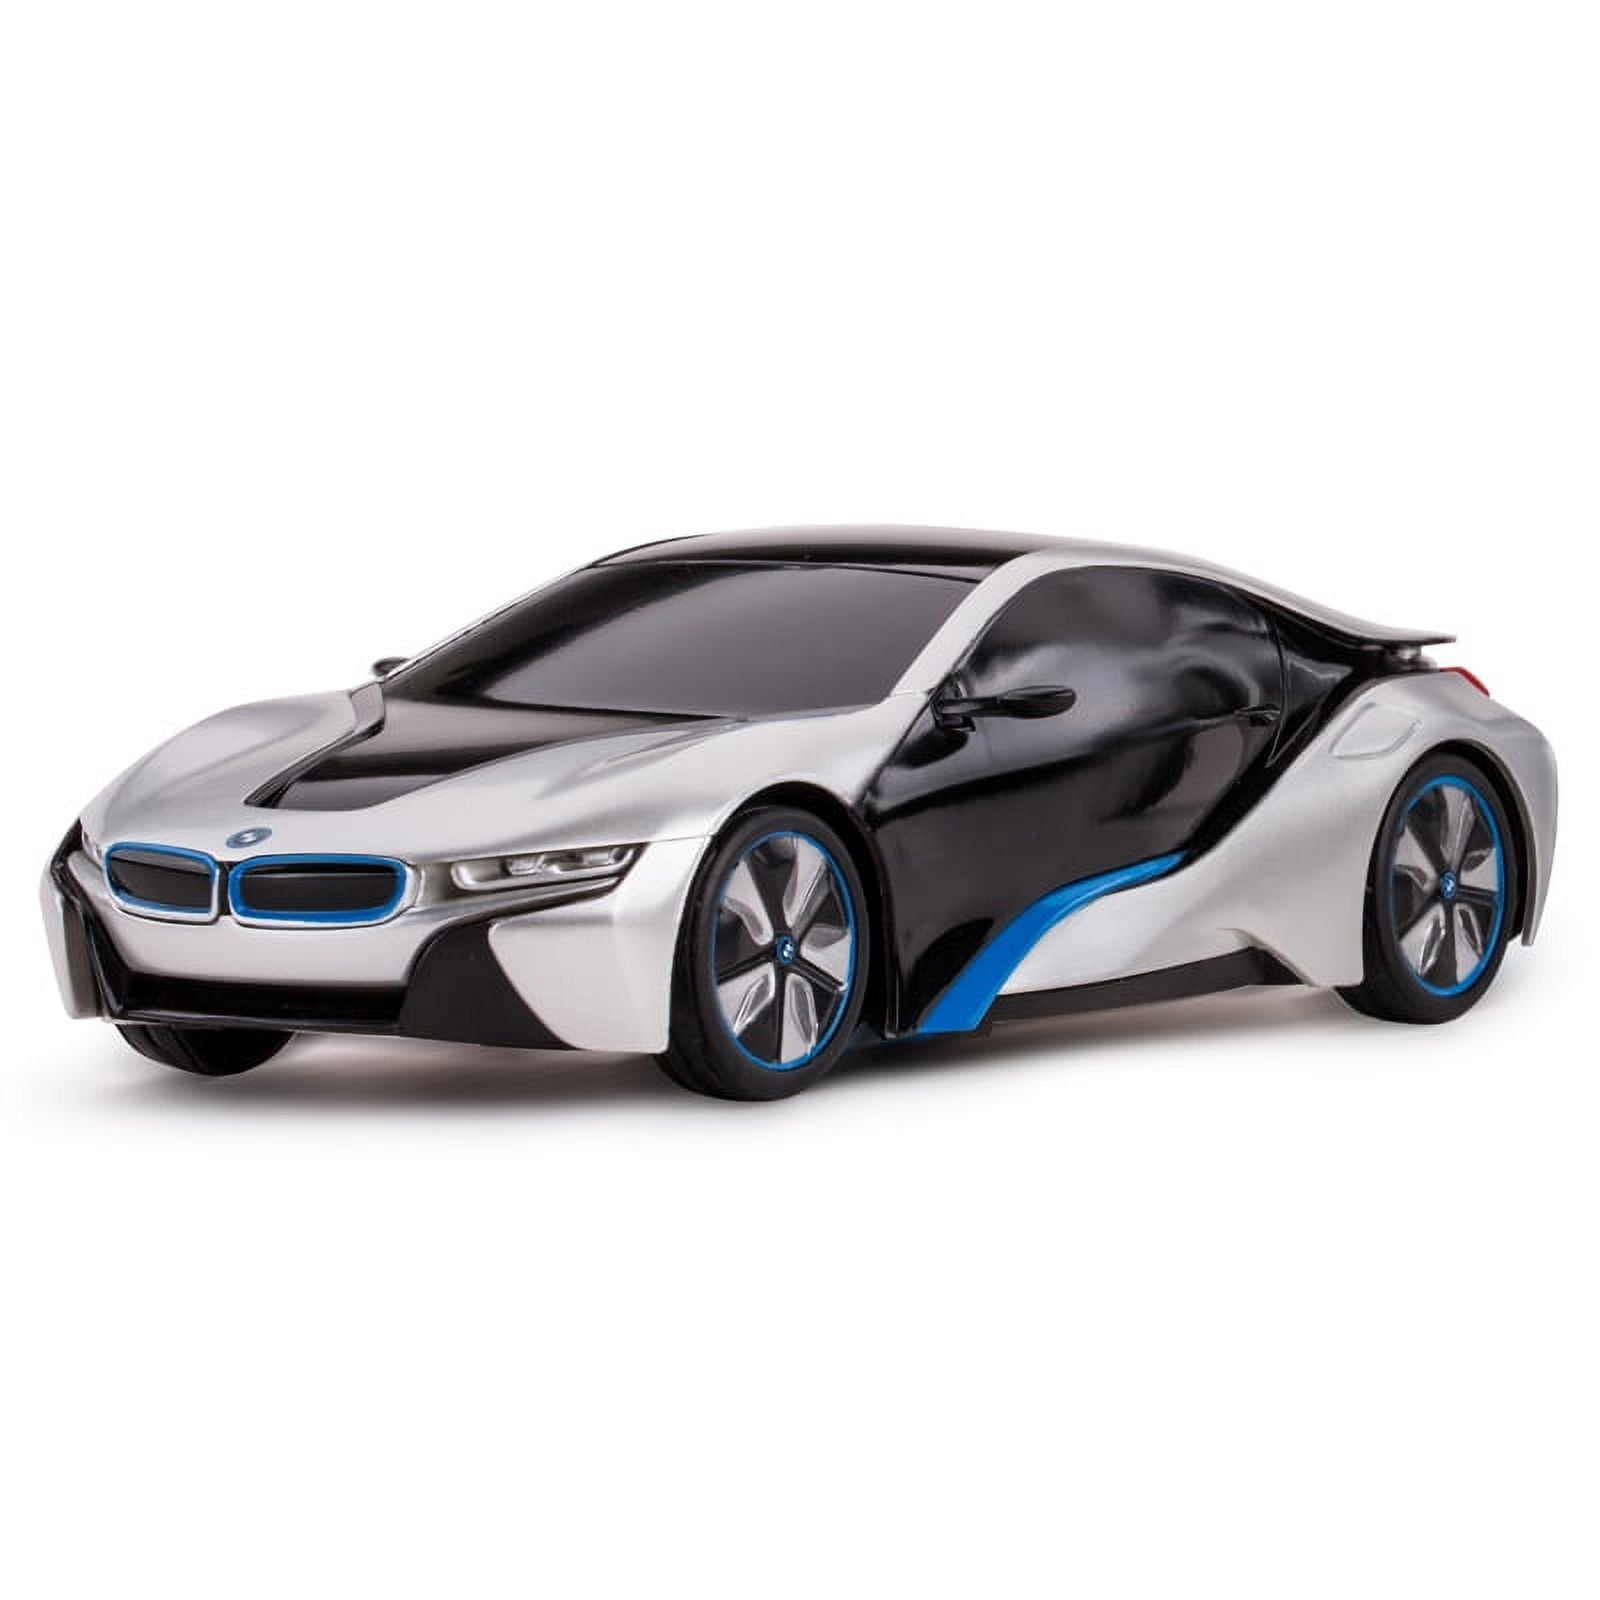 Speed Racers 1:24 RC BMW i8 Concept RC Sports Car - White